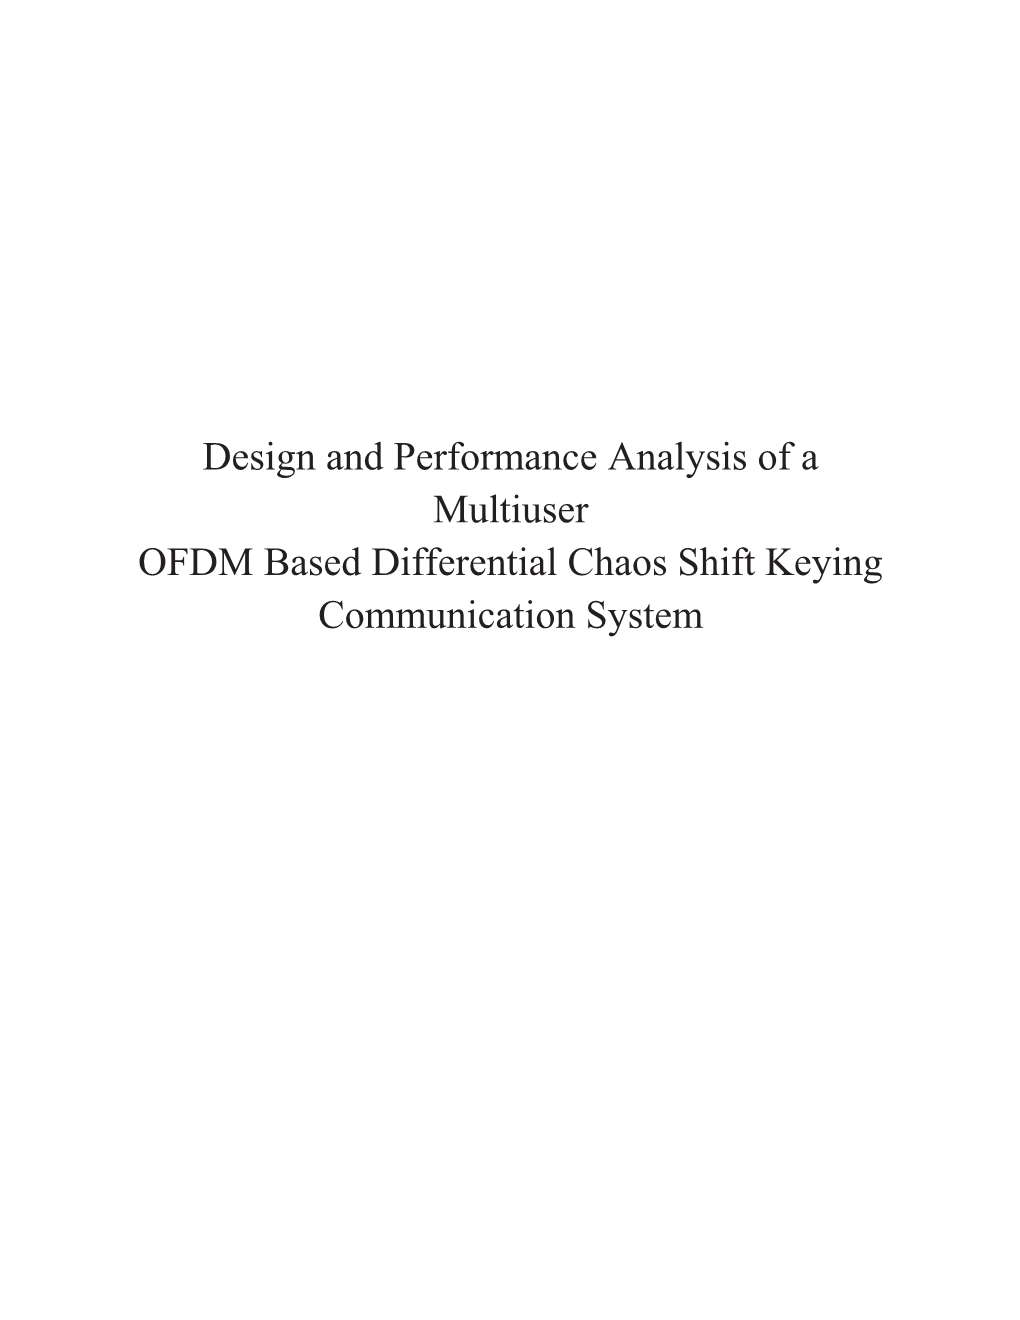 Design and Performance Analysis of a Multiuser OFDM Based Differential Chaos Shift Keying